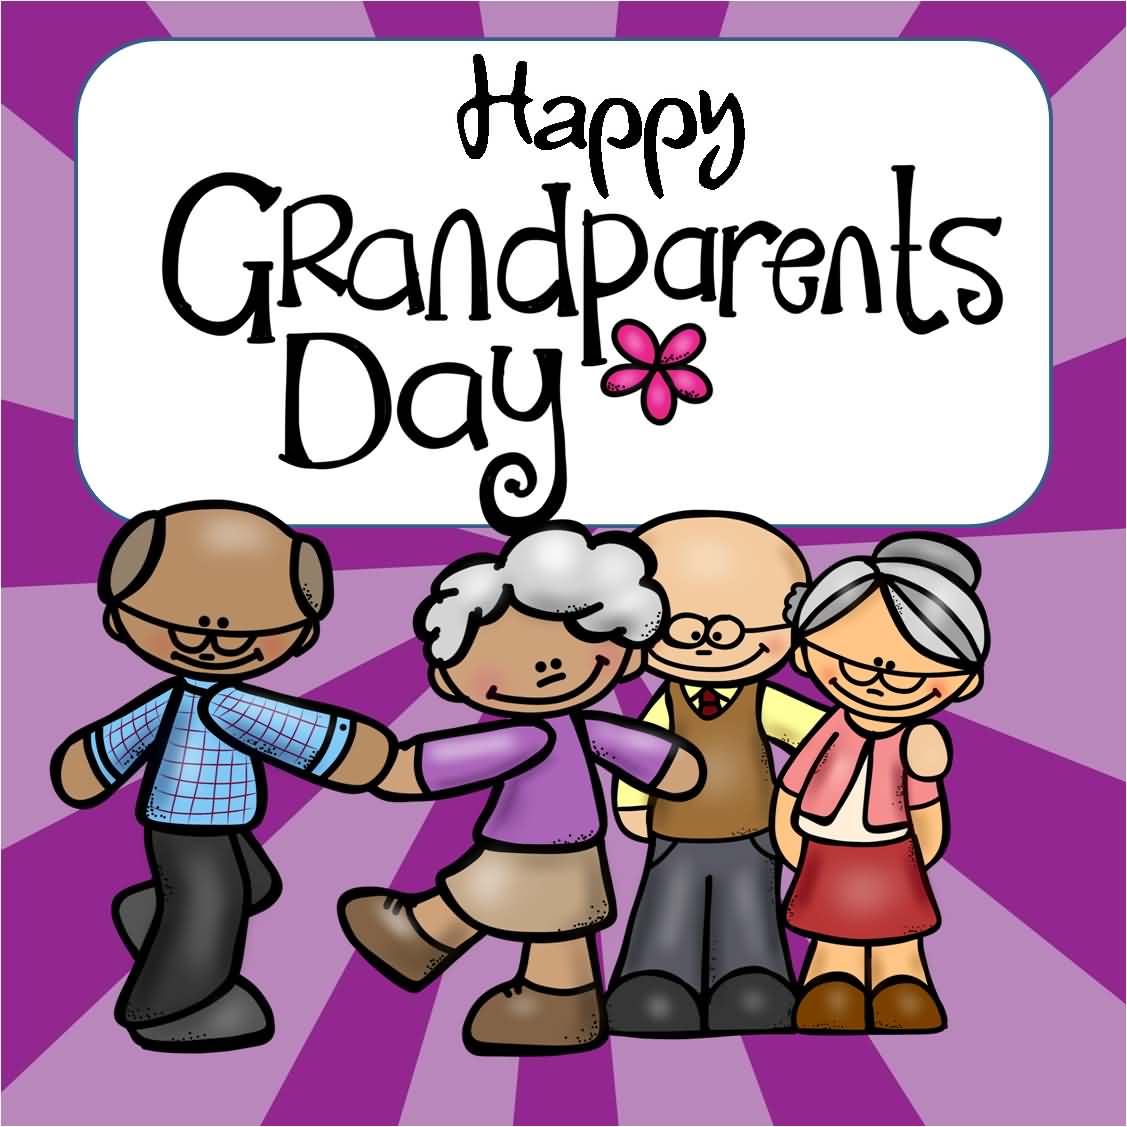 Happy grandparents day old couples illustration